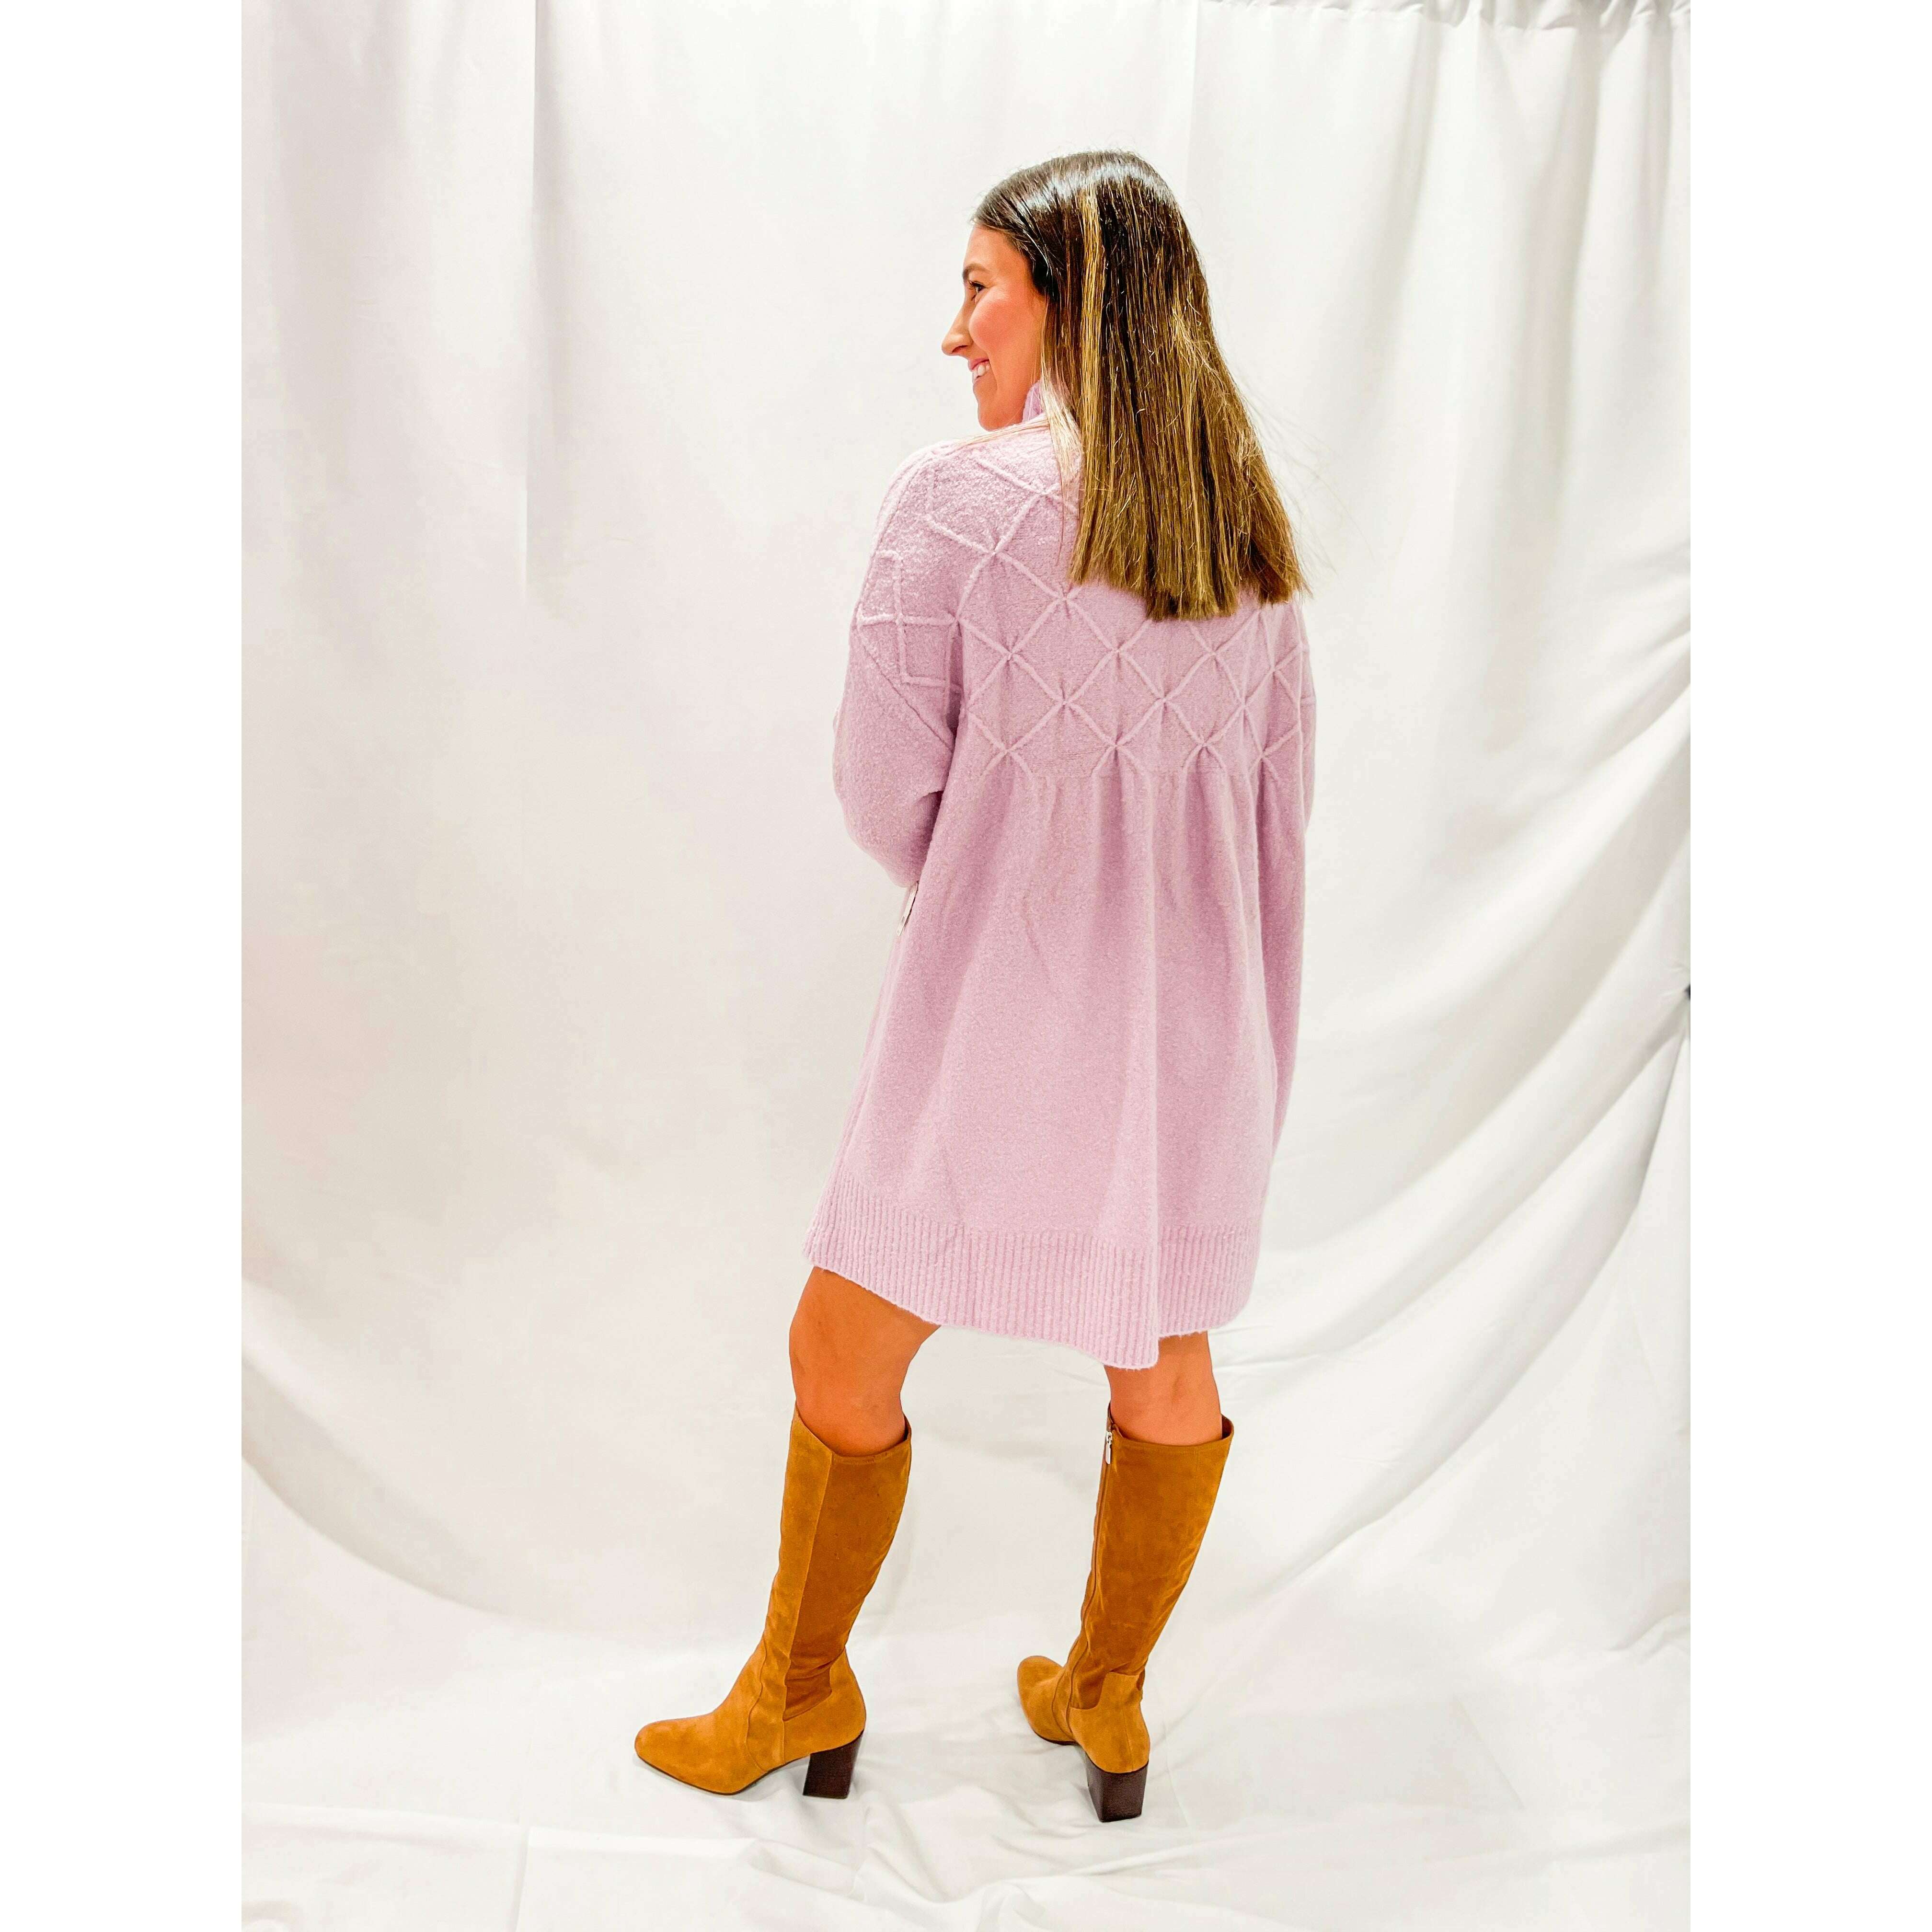 8.28 Boutique:Free People,Free People Jaci Sweater Dress in Lavender,Dress